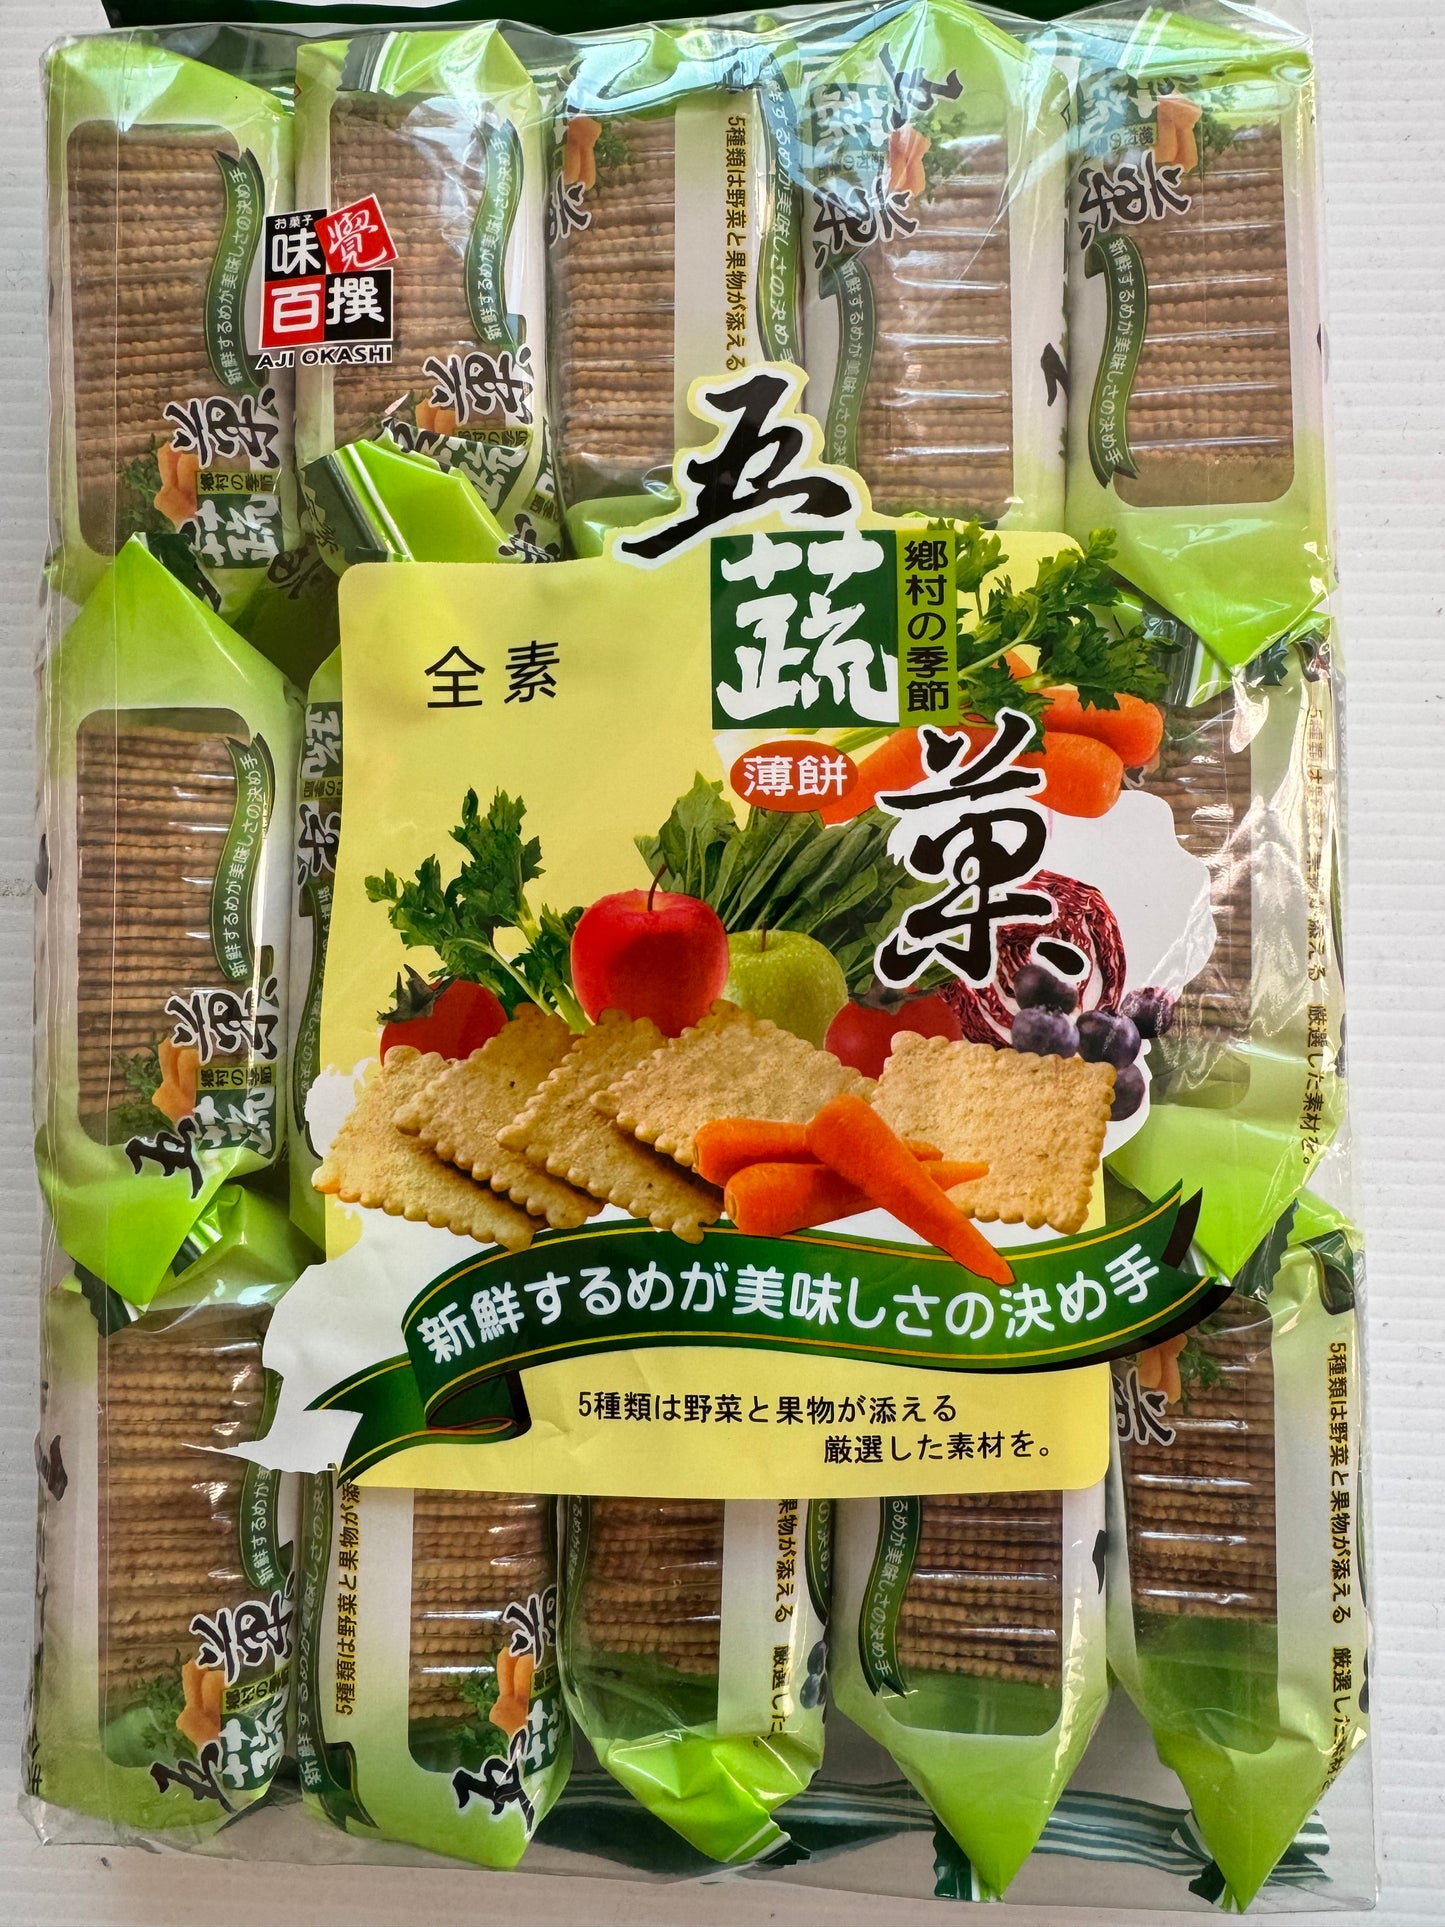 Five-vegetable and fruit thin pancakes, (1.5 pounds per pack, individually wrapped inside)